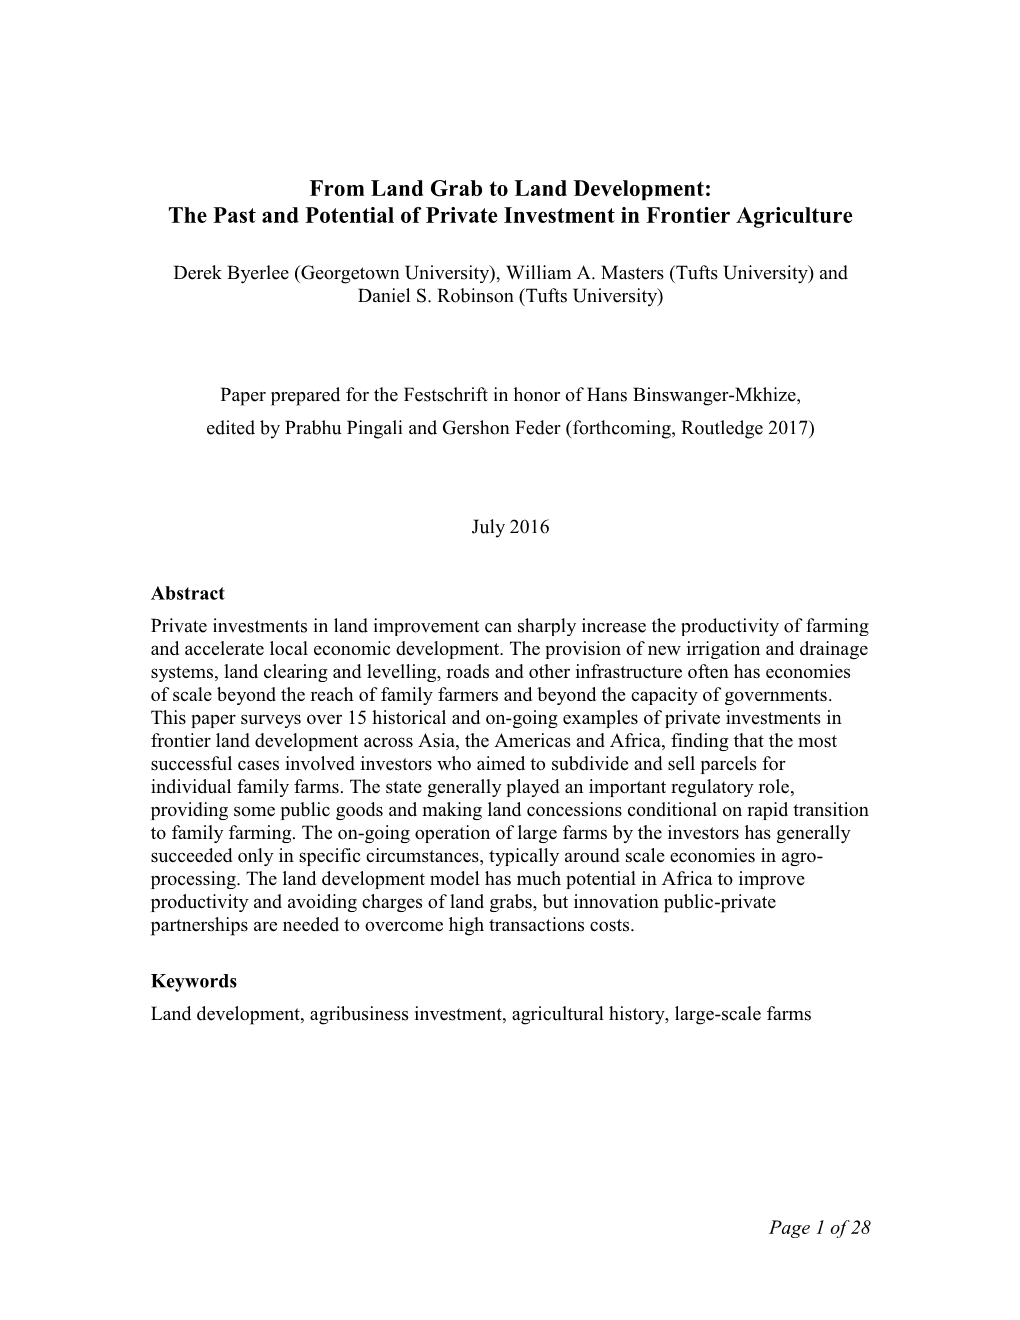 From Land Grab to Land Development: the Past and Potential of Private Investment in Frontier Agriculture